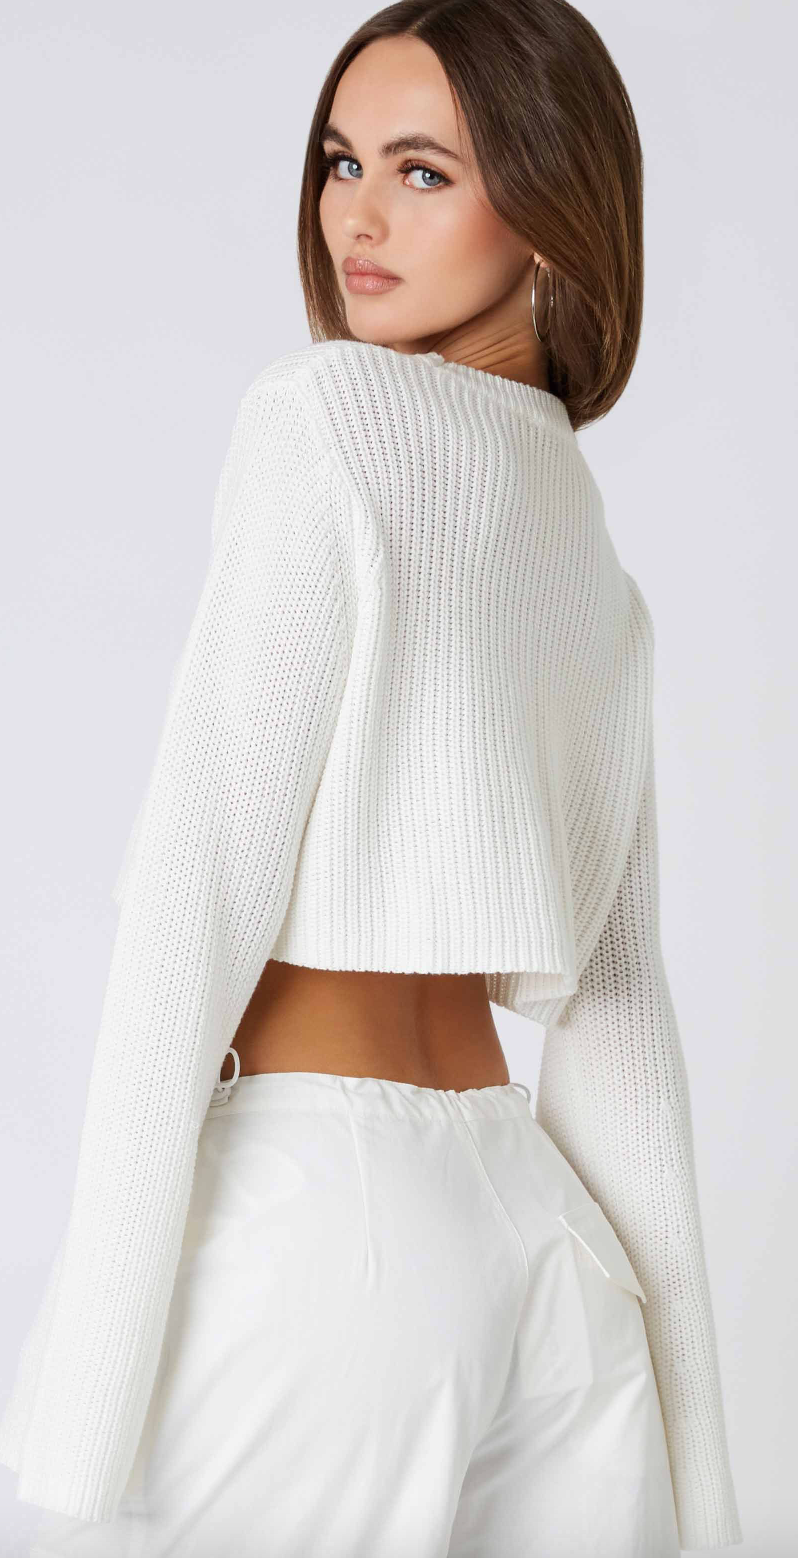 Bette Cropped Sweater